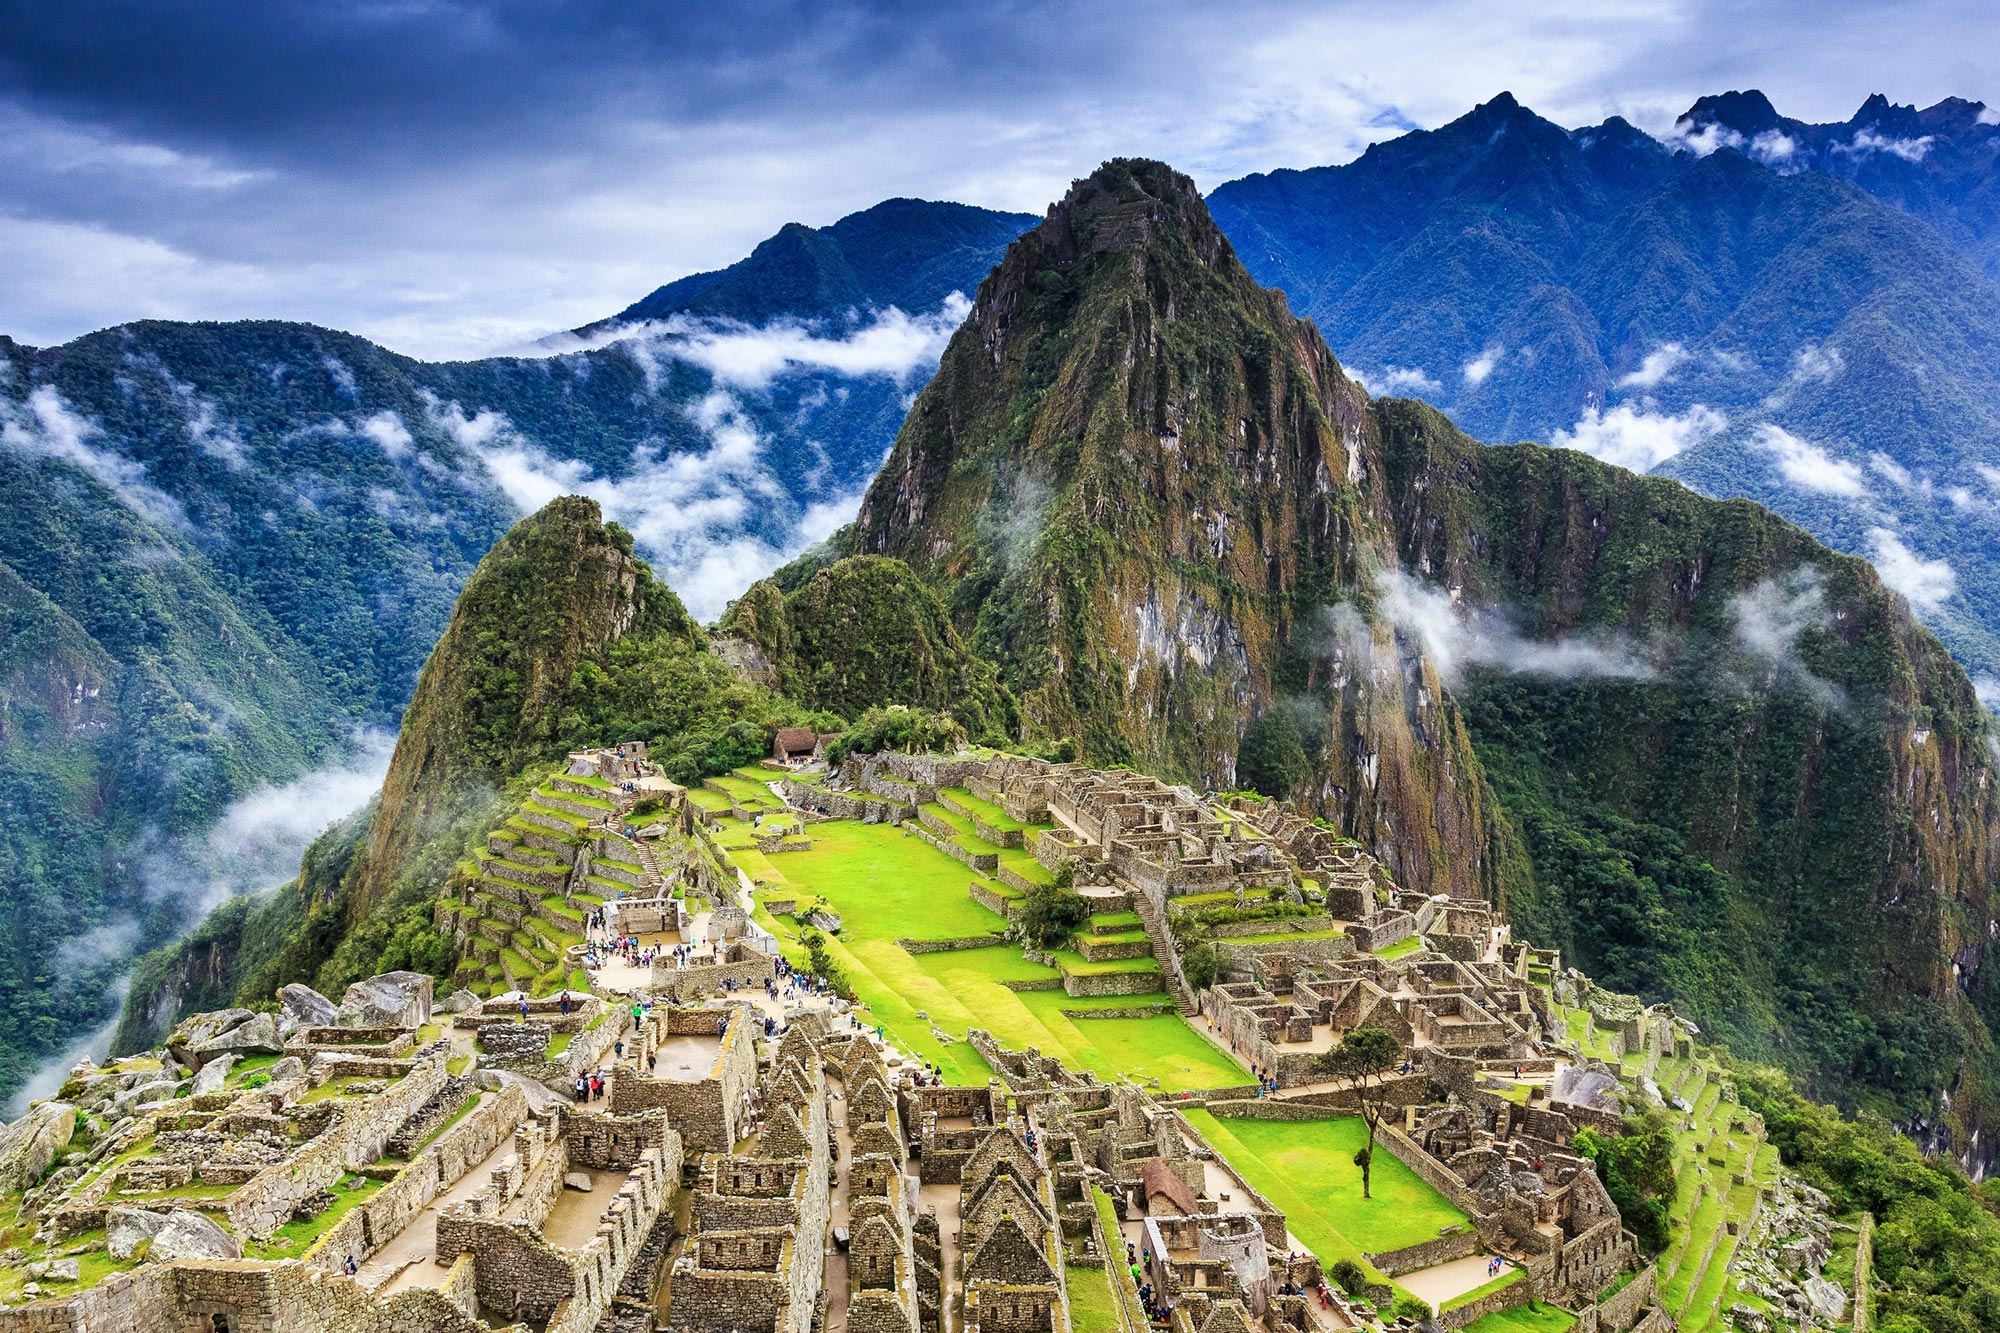 Historical Timeline Is Inaccurate: Advanced Radiocarbon Dating Reveals Machu  Picchu Is Older Than Expected